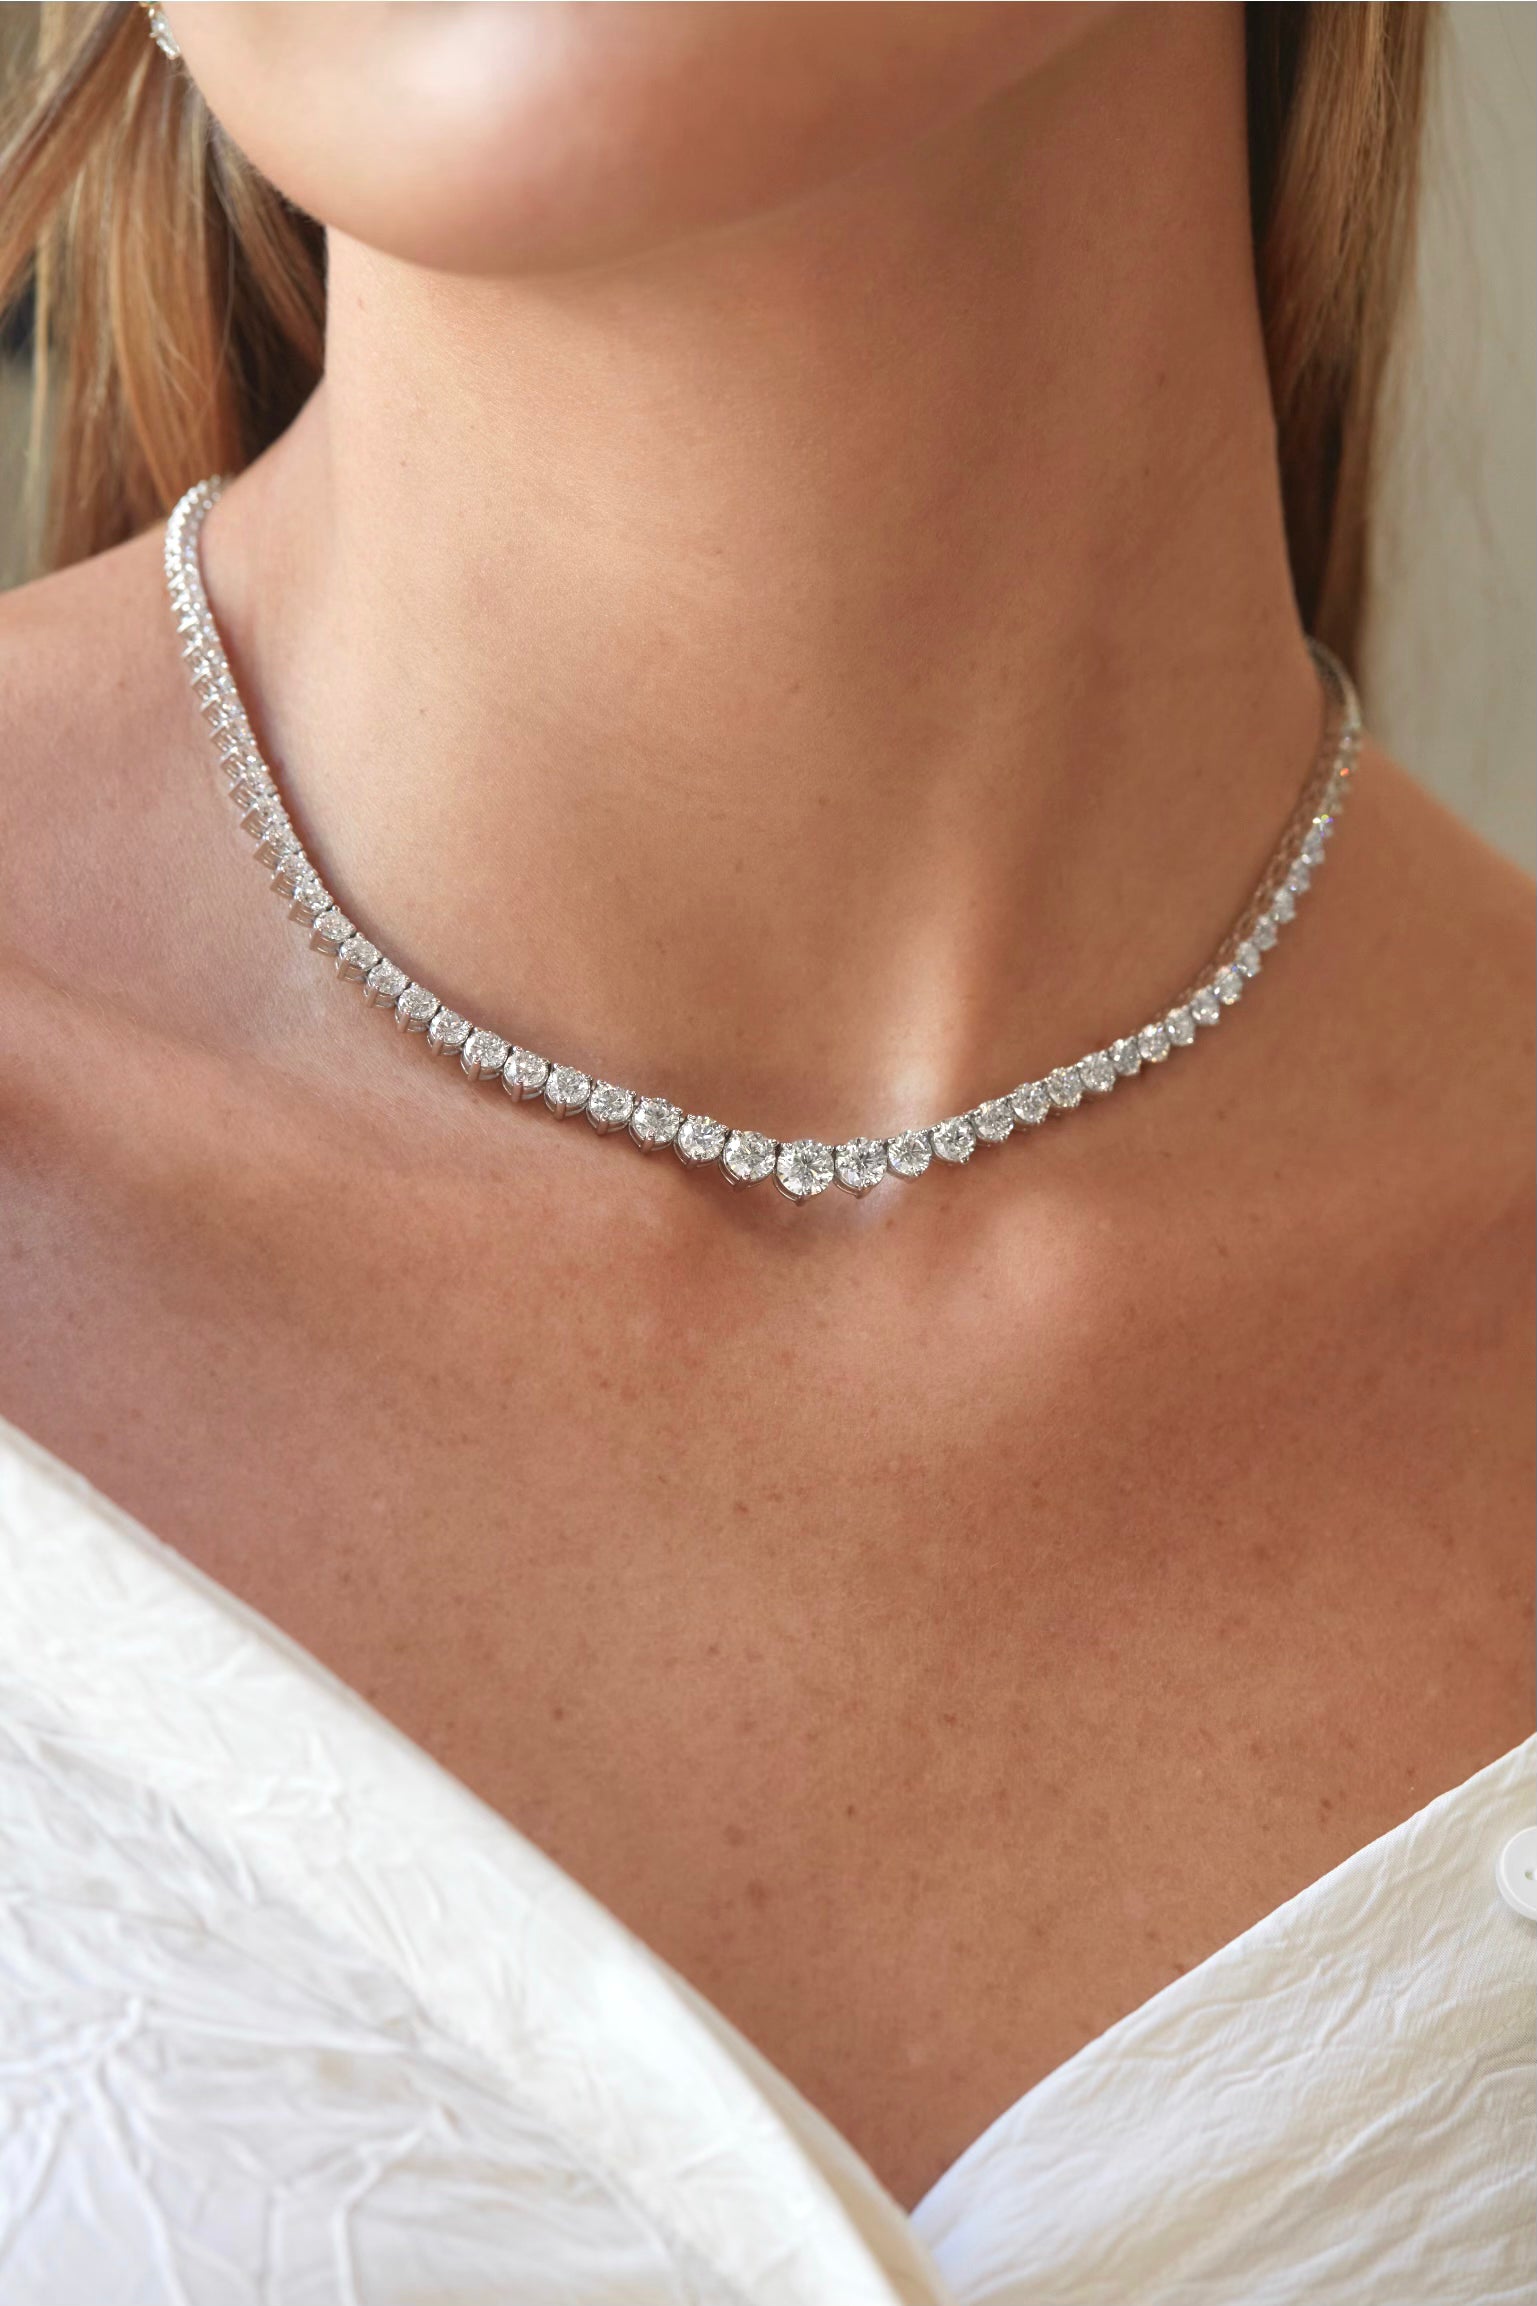 Diamond Necklace with a Tiny Heart Chain Pendant – ARTEMER